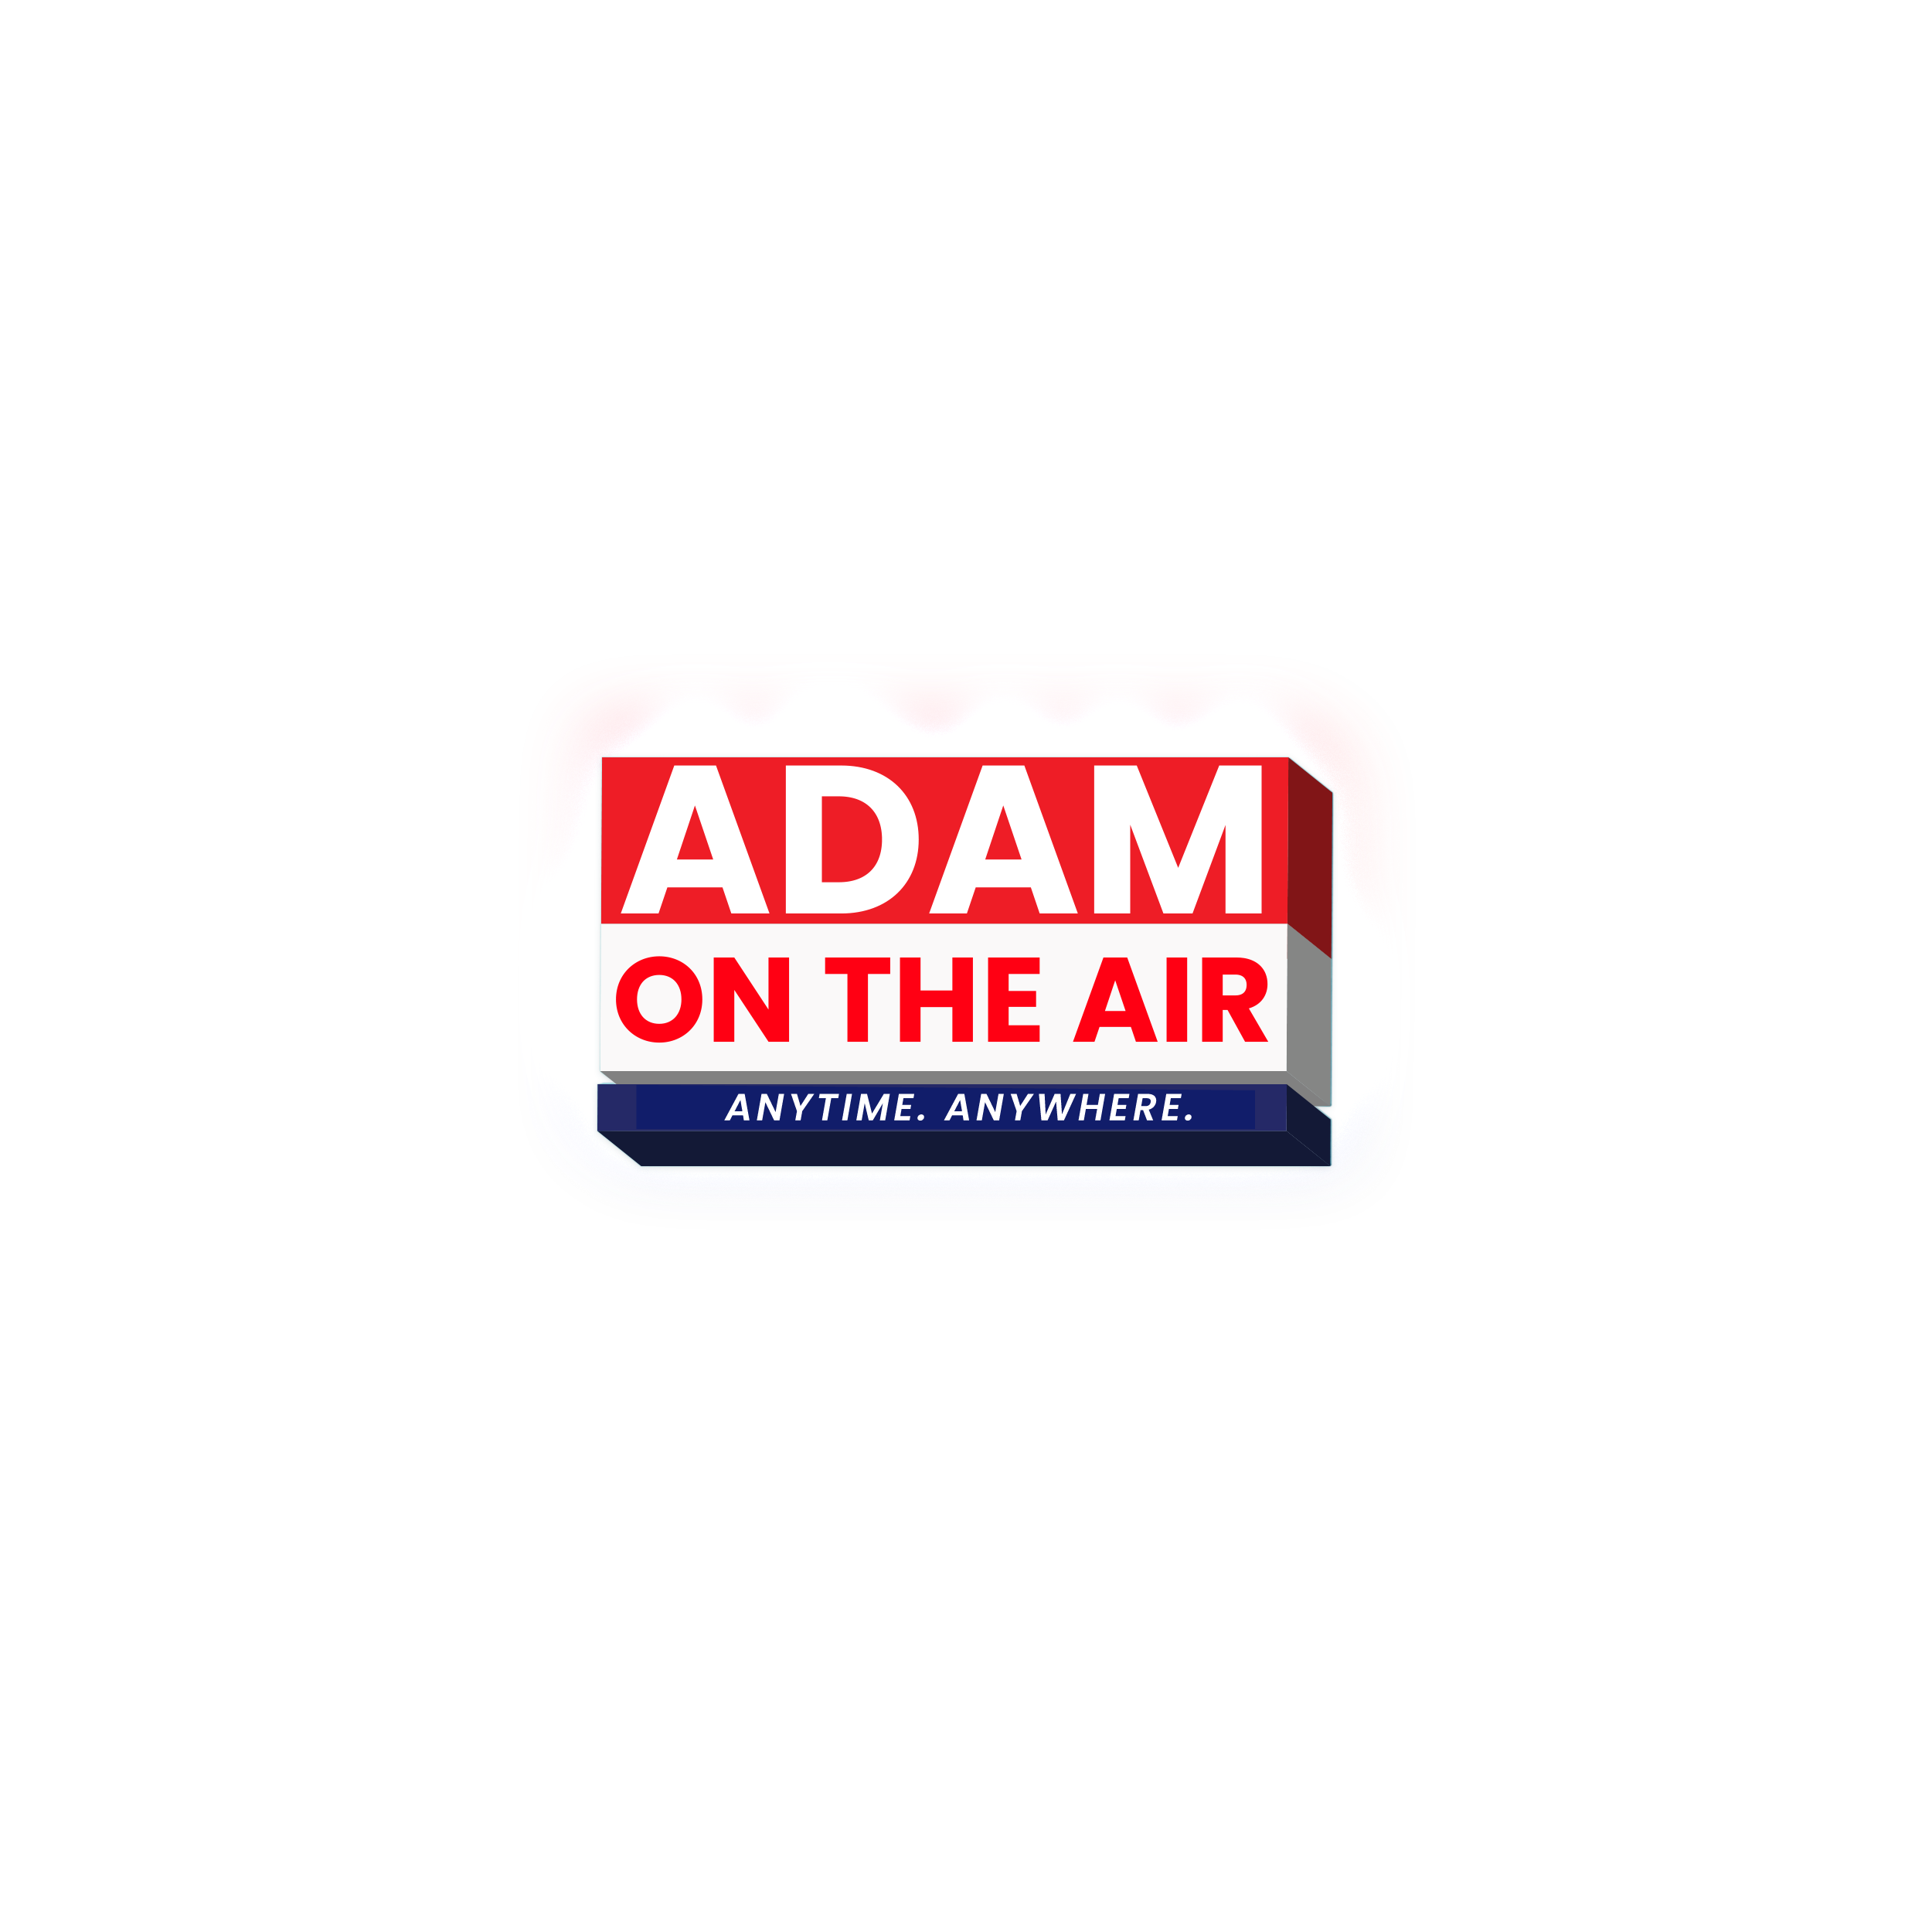 Art for ADAM ON THE AIR by ANYTIME. ANYWHERE.